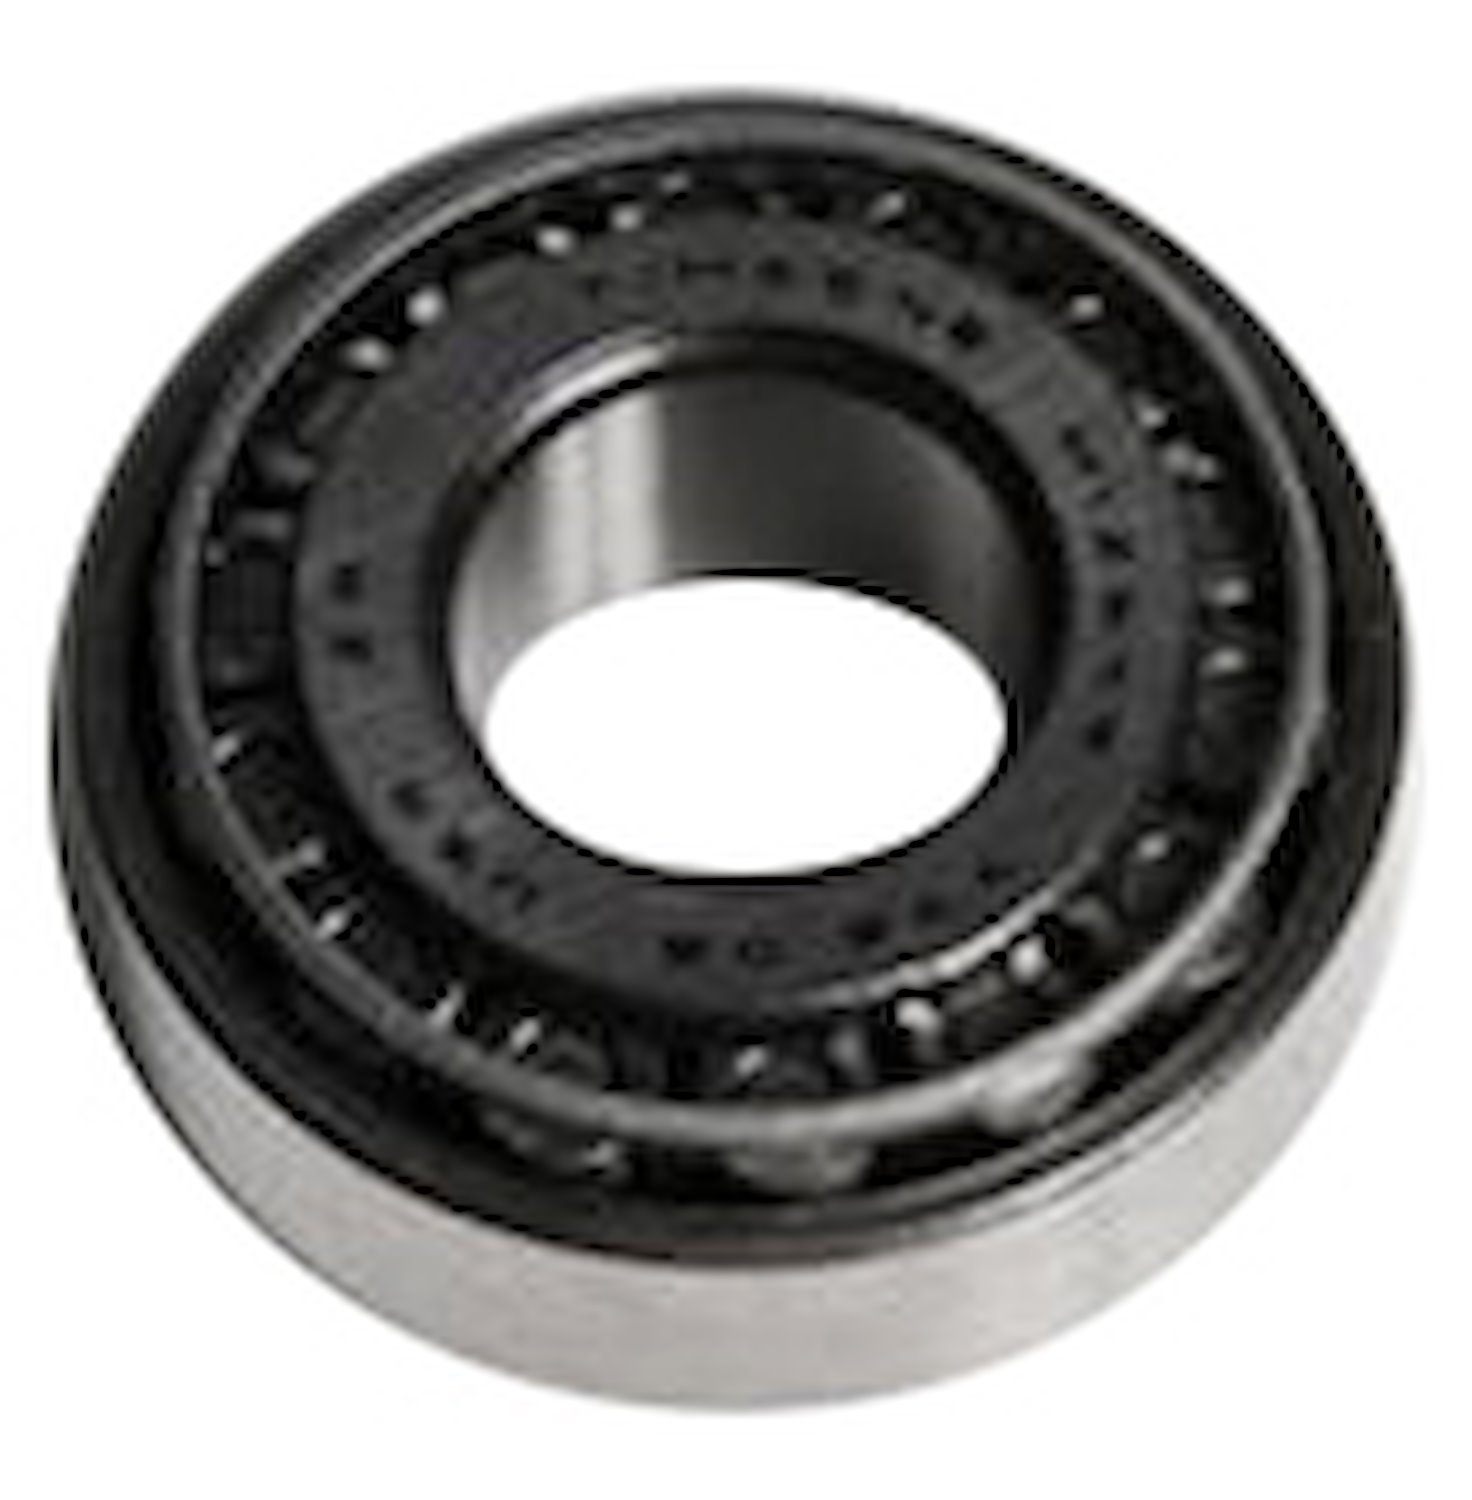 Front Outer Wheel Bearing for Select 1982-2002 Buick, Cadillac, Chevrolet, GMC, Oldsmobile, Pontiac